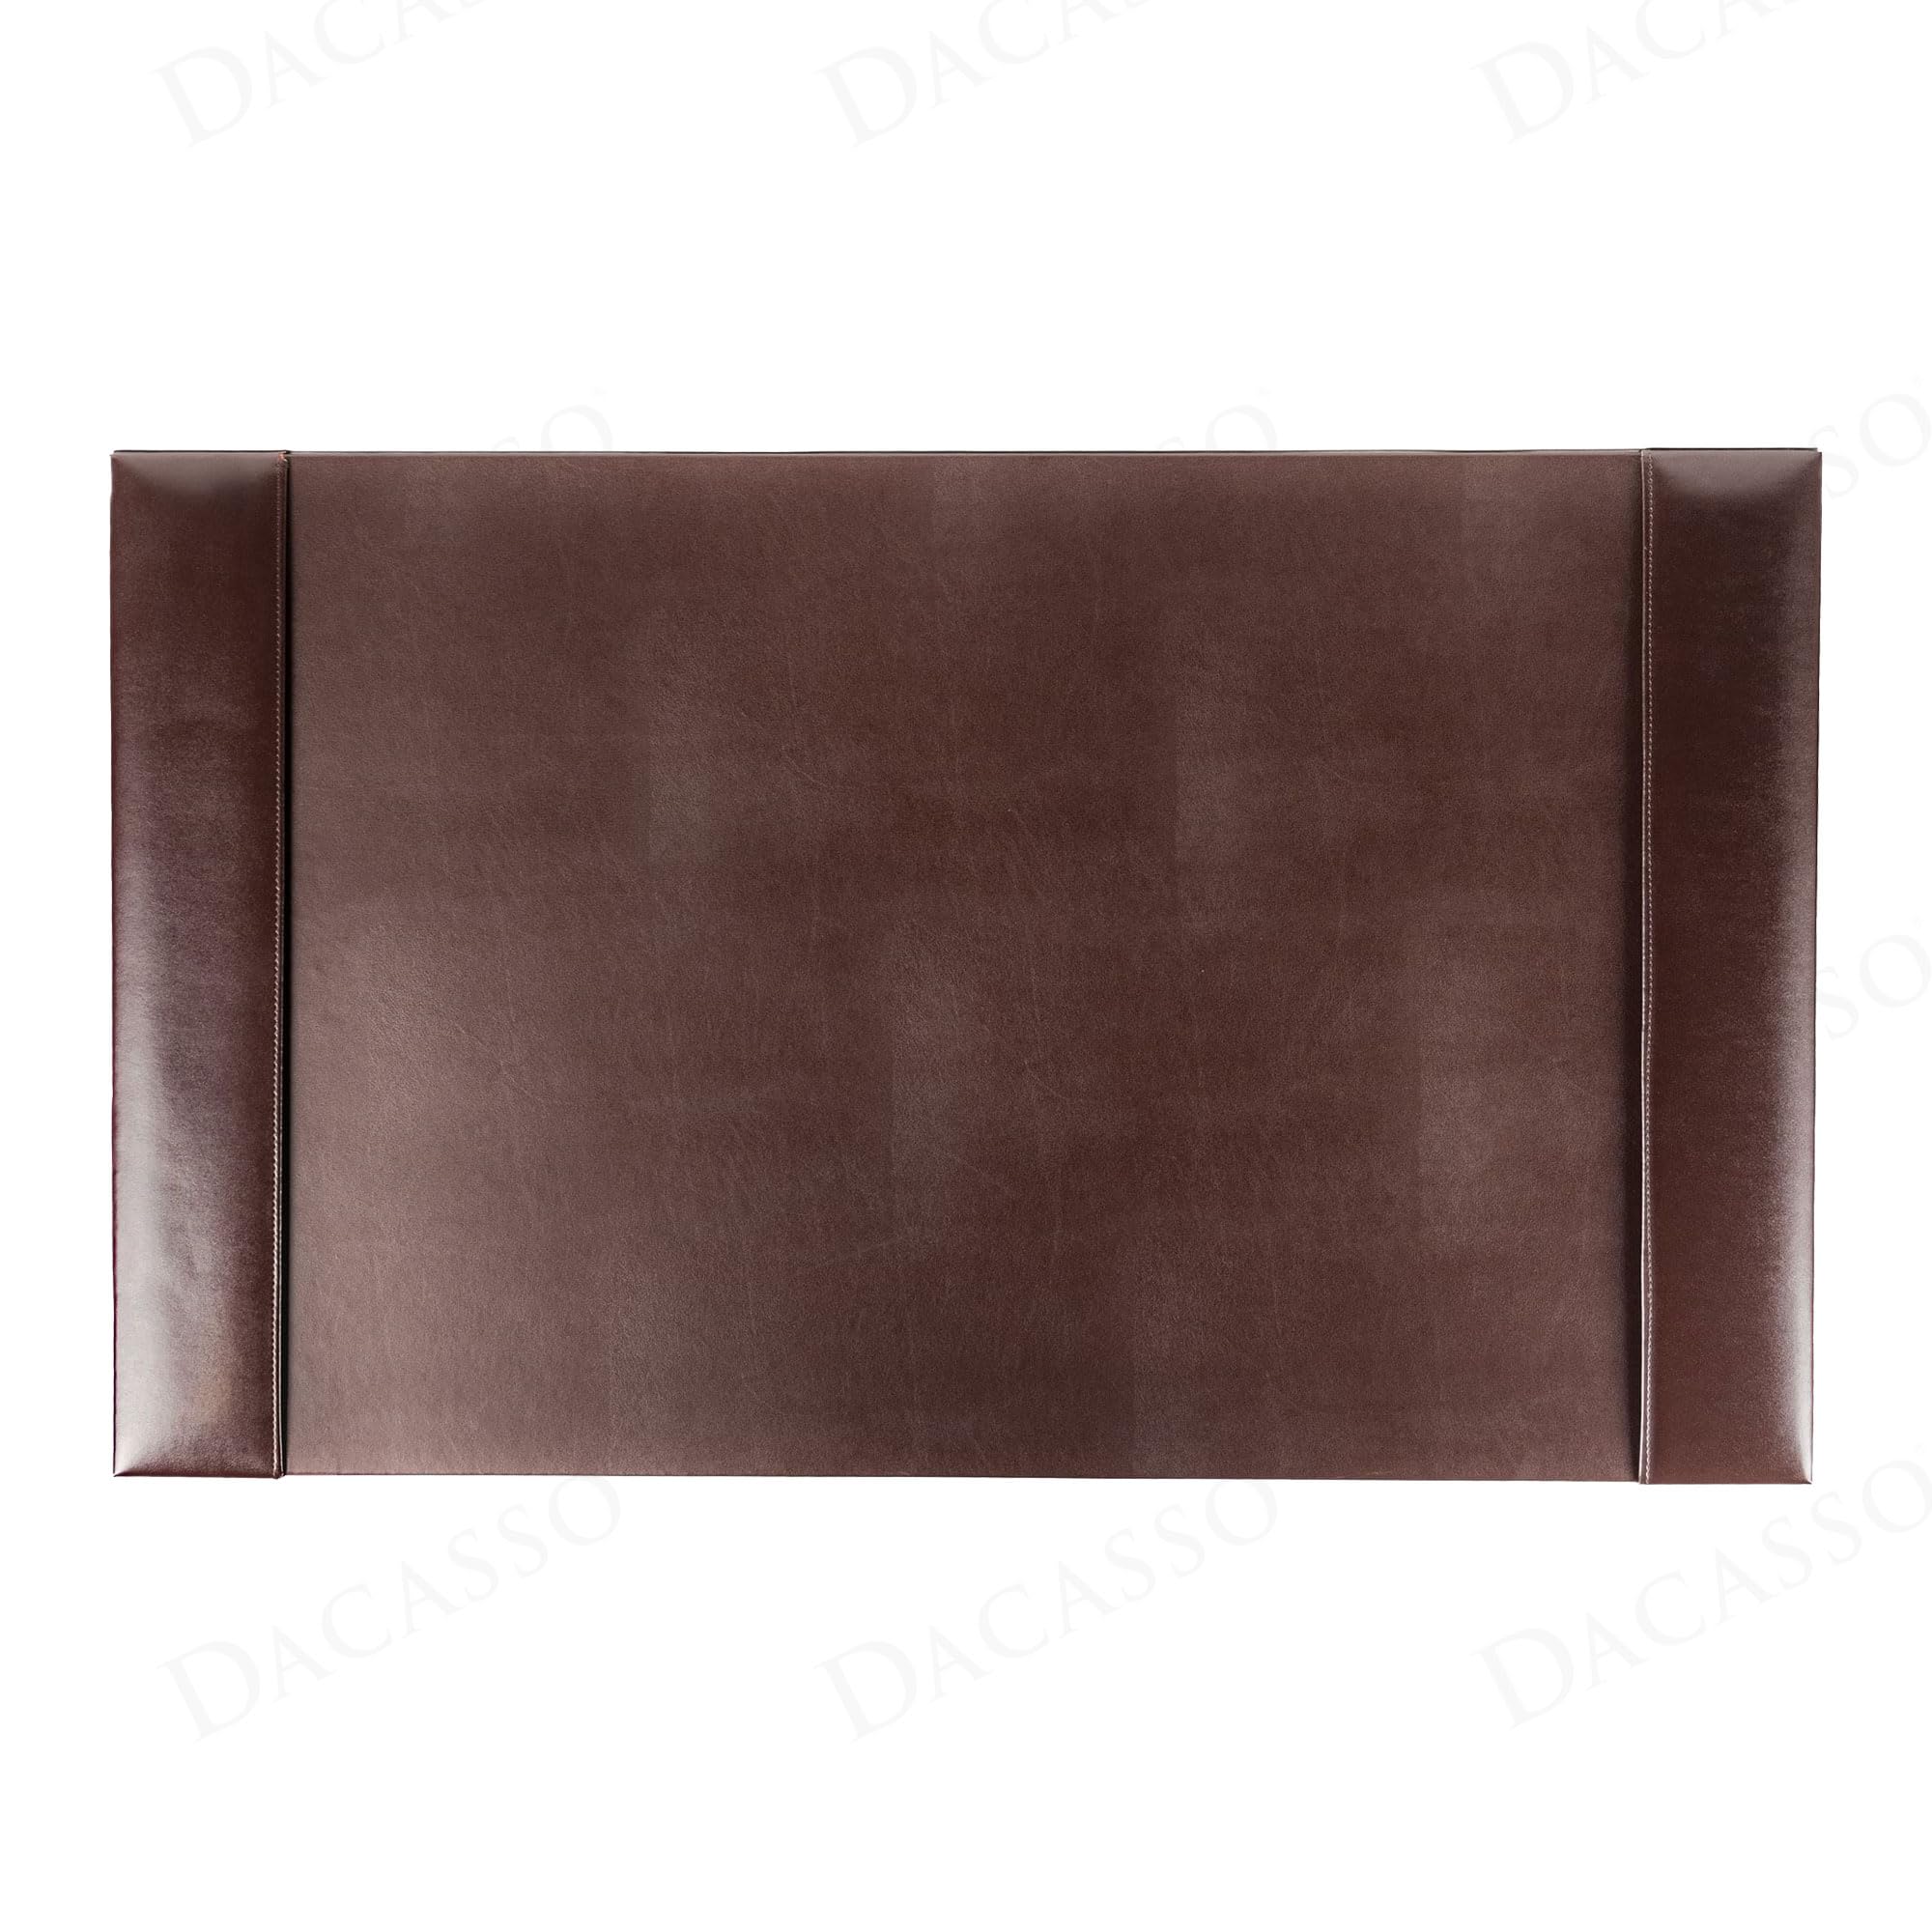 DACASSO Bonded Leather Desk Pad with Side Rails - Luxury Leather Desk Blotter for Writing (30 x 18, Brown)